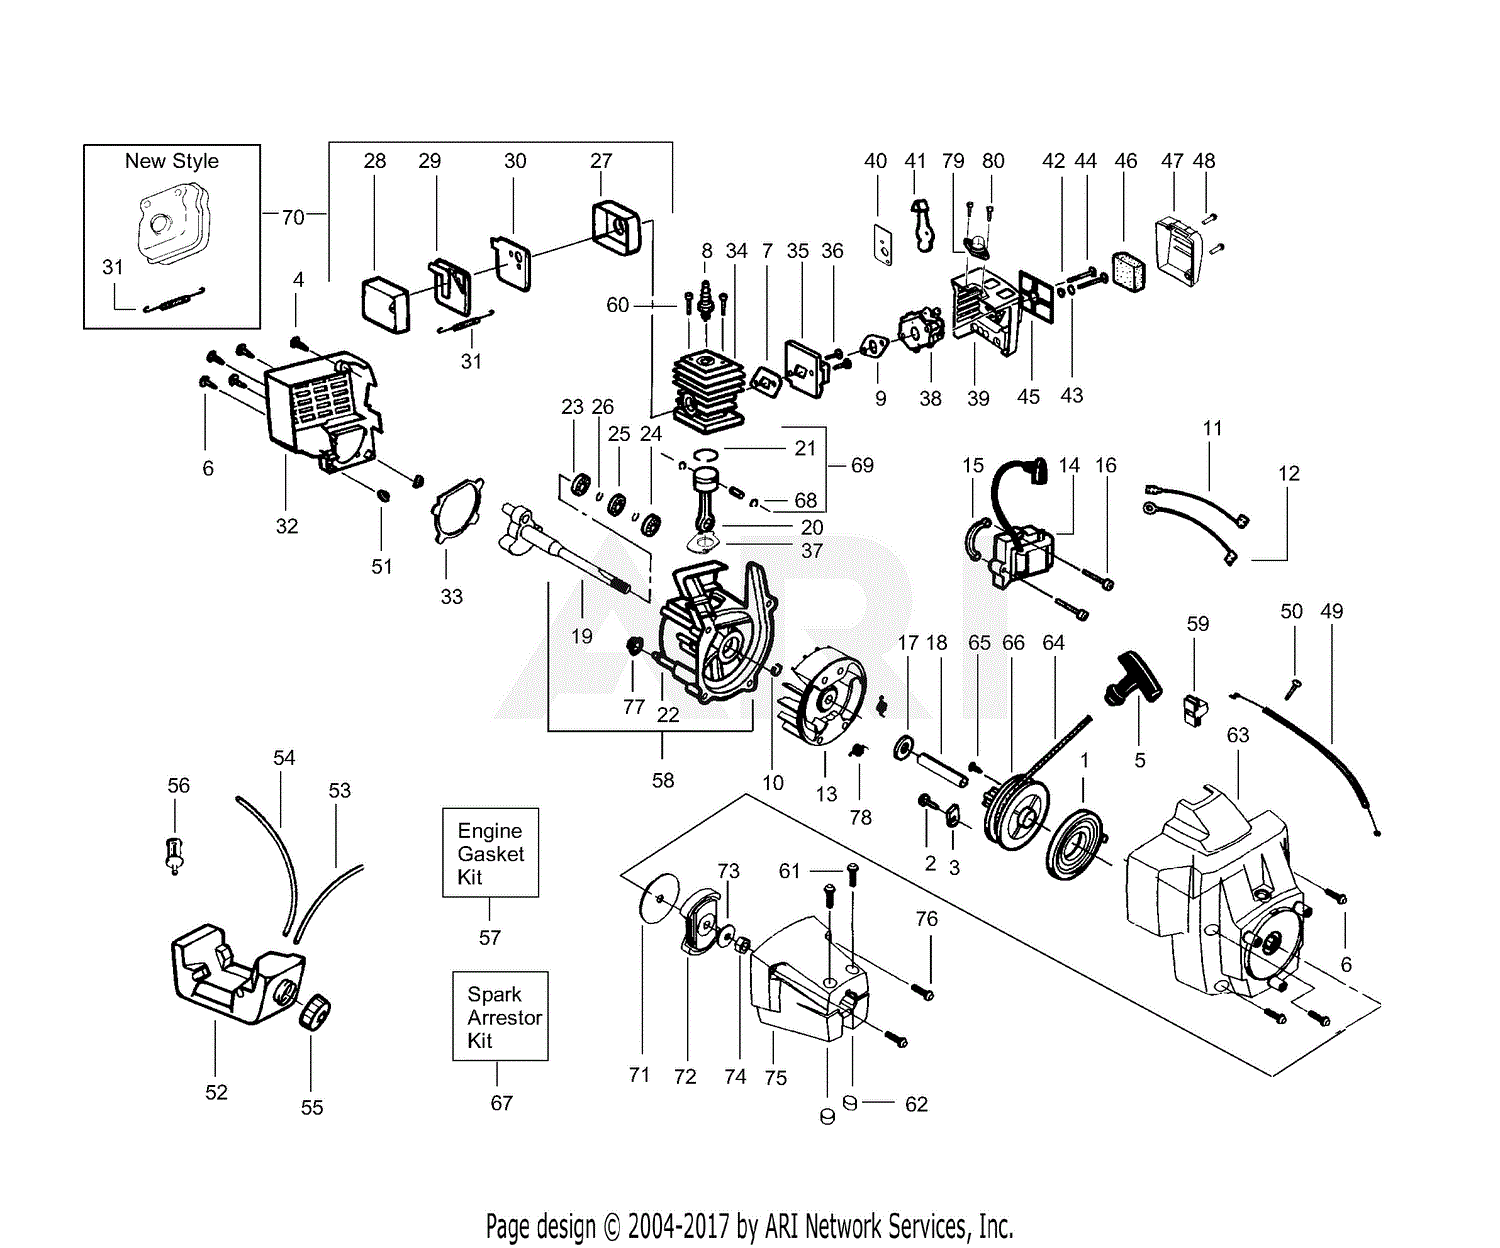 wiring diagram for a stihl fs 62 weedeater